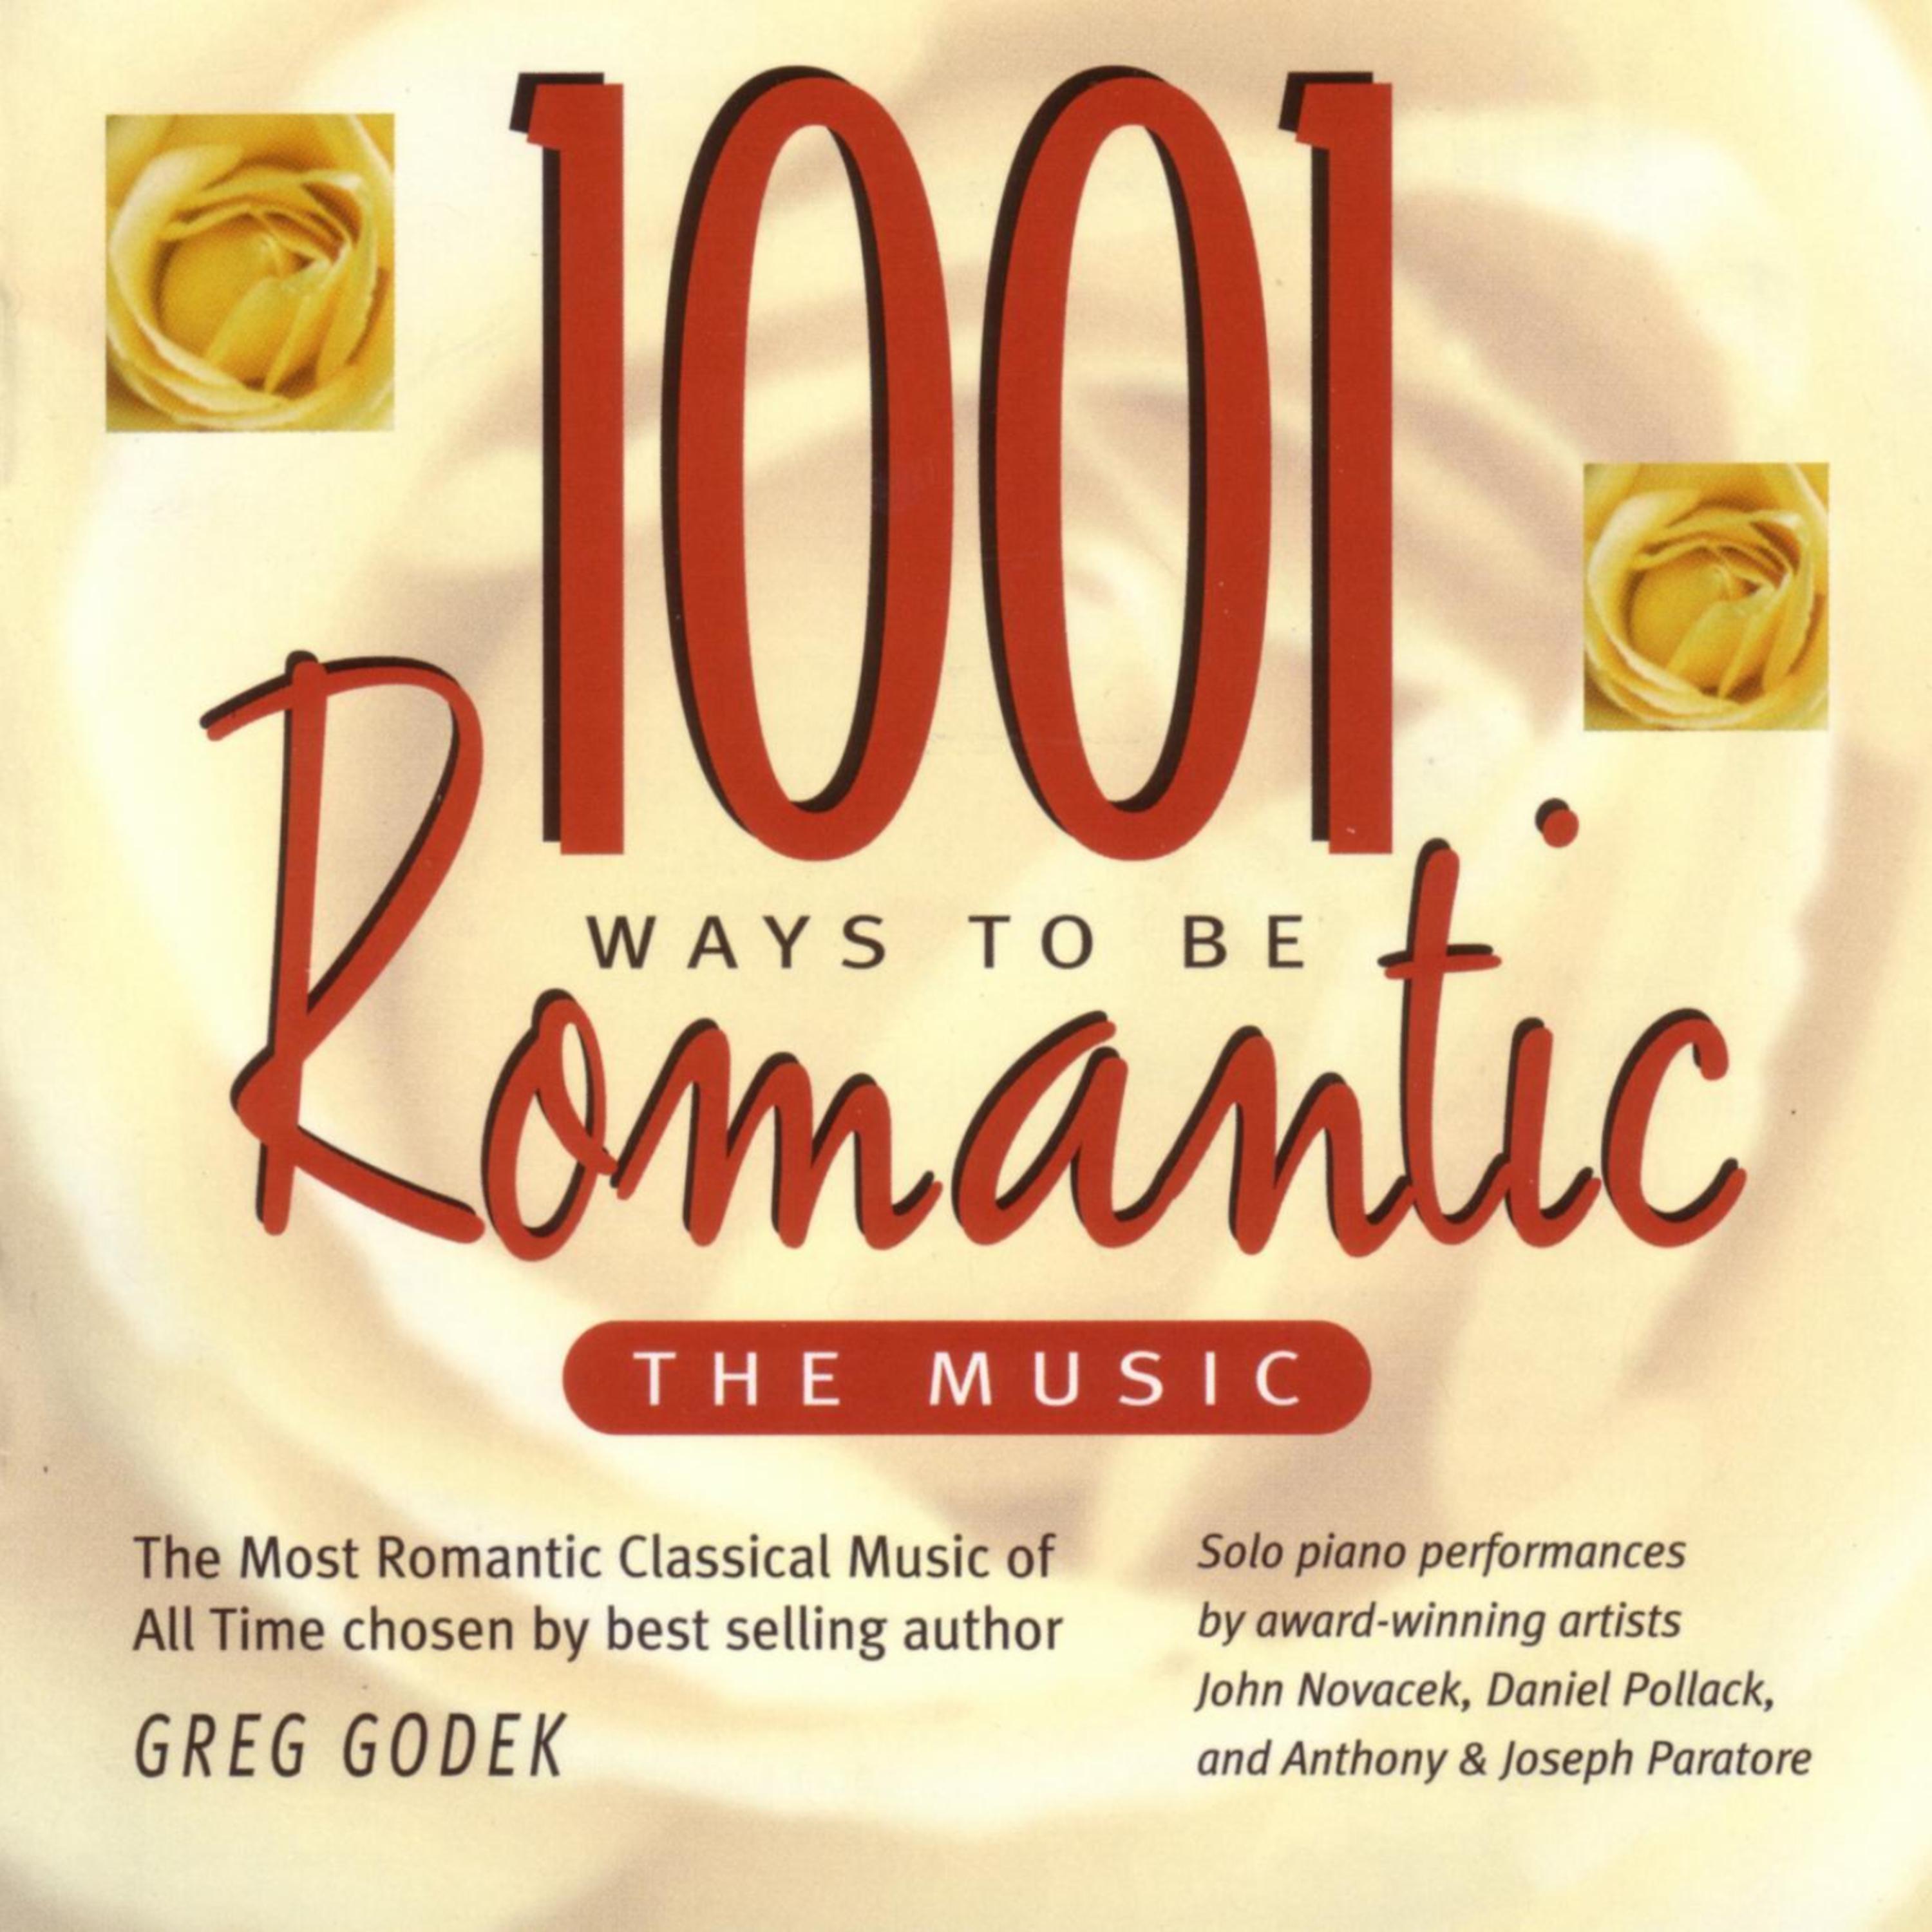 Постер альбома "1001 Ways To Be Romanic ~ The Music" - The Most Romantic Classical Piano Music of All Time